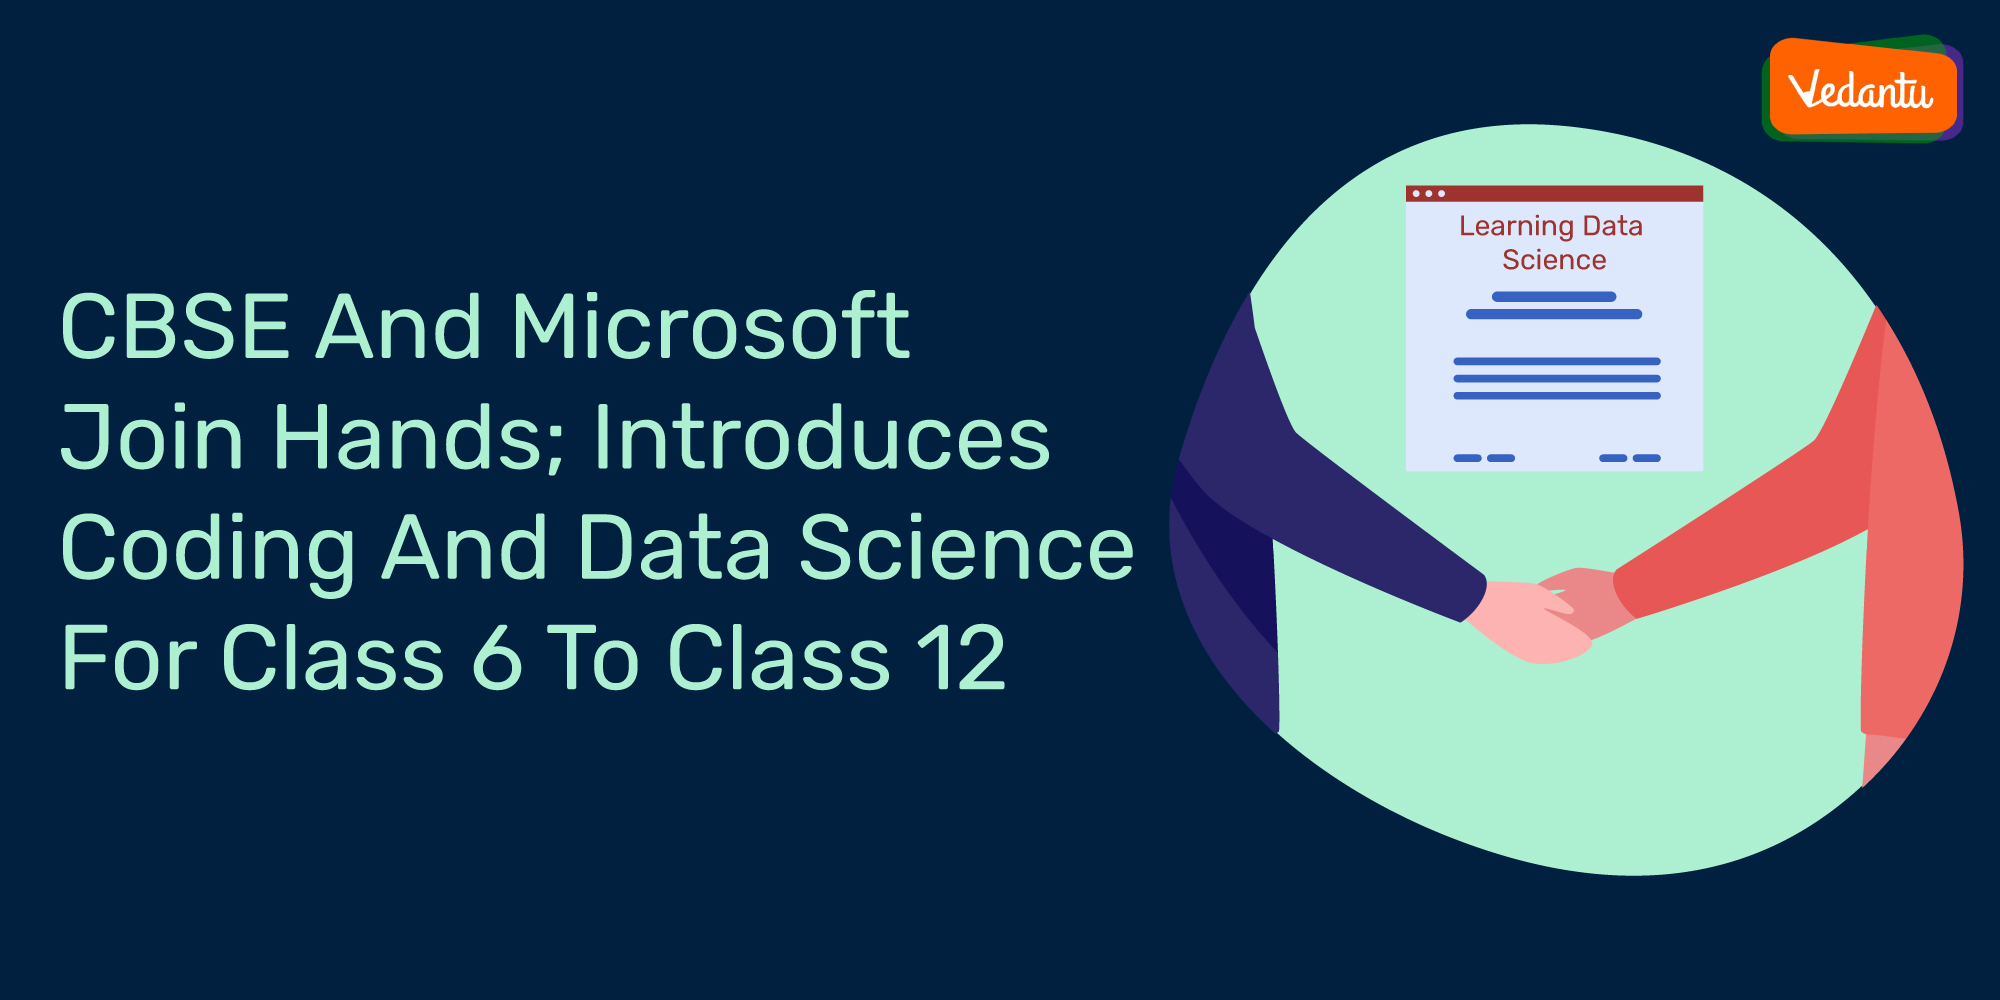 CBSE And Microsoft Join Hands; Introduces Coding And Data Science For Class 6 To Class 12